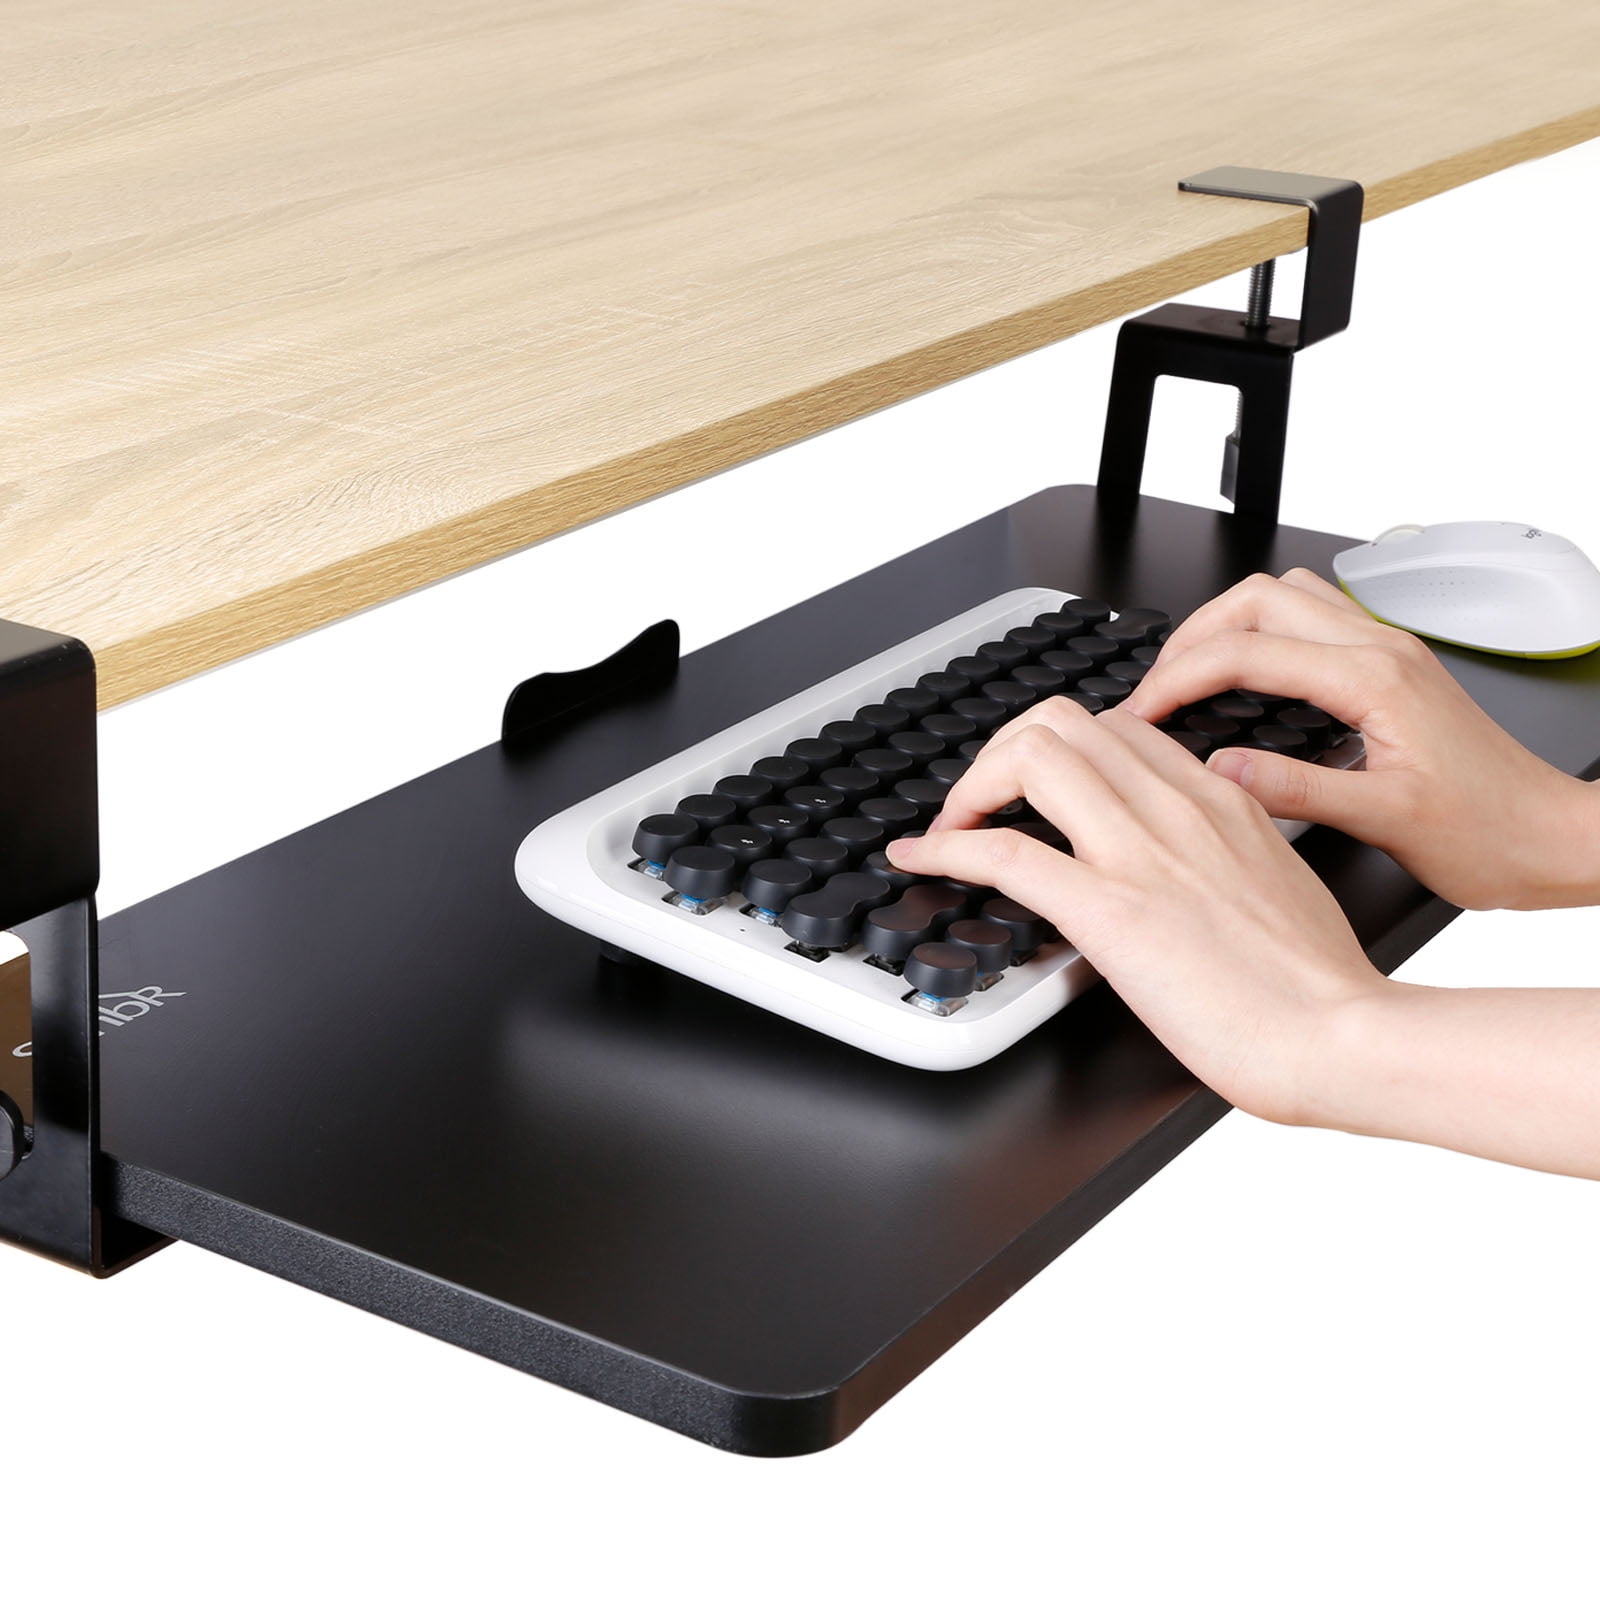 Keyboard Tray Under Desk Adjustable Ergonomic Desk Extender for Keyboard,Mouse,Slide Keyboard Stand with Sturdy C-Clamps Ship from USA Directly No Screws into Desk 